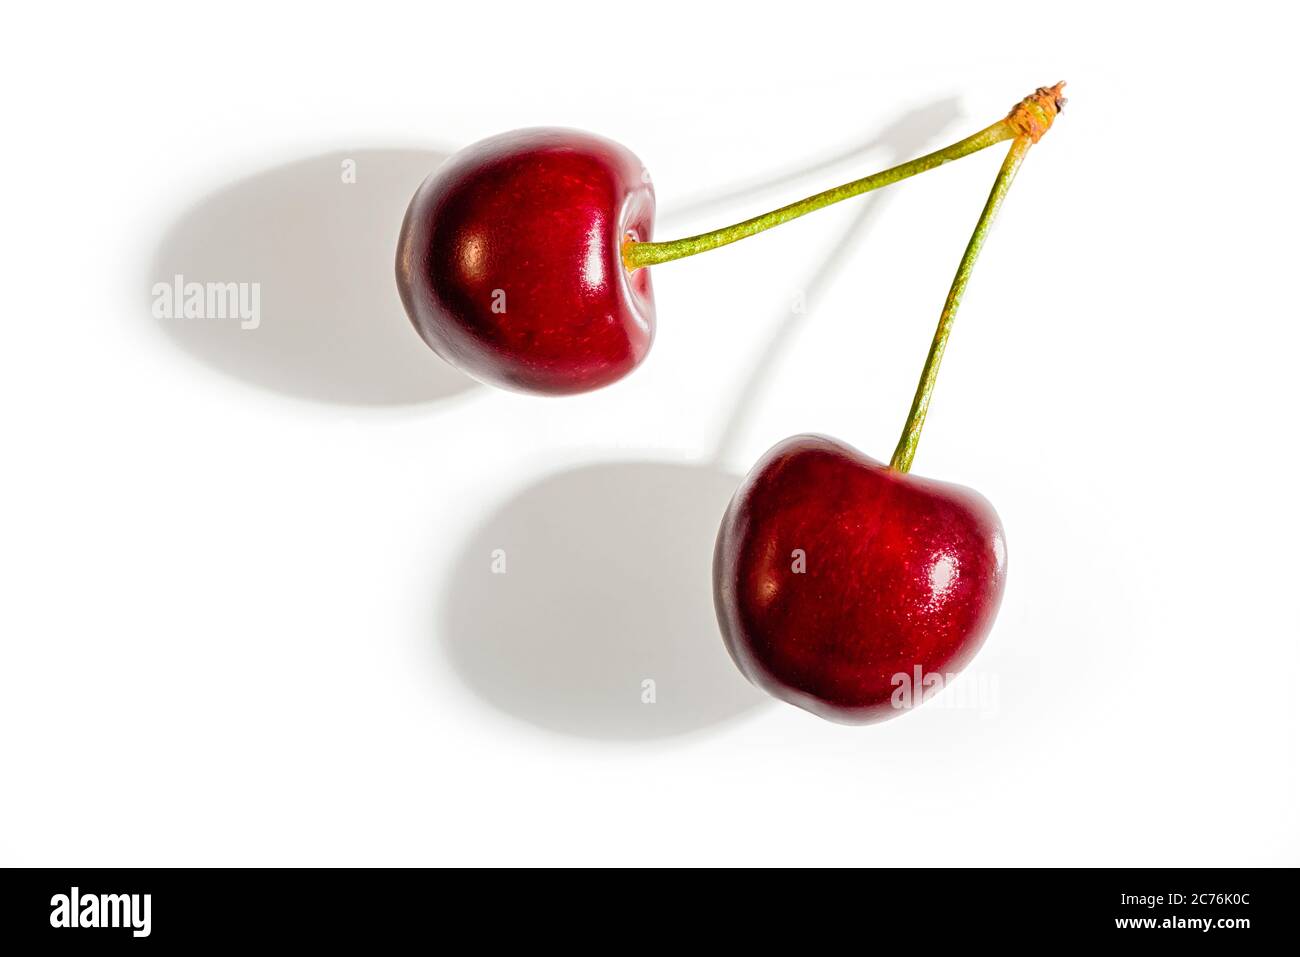 Sweet cherries with a shadow on a white background. Top view. Stock Photo